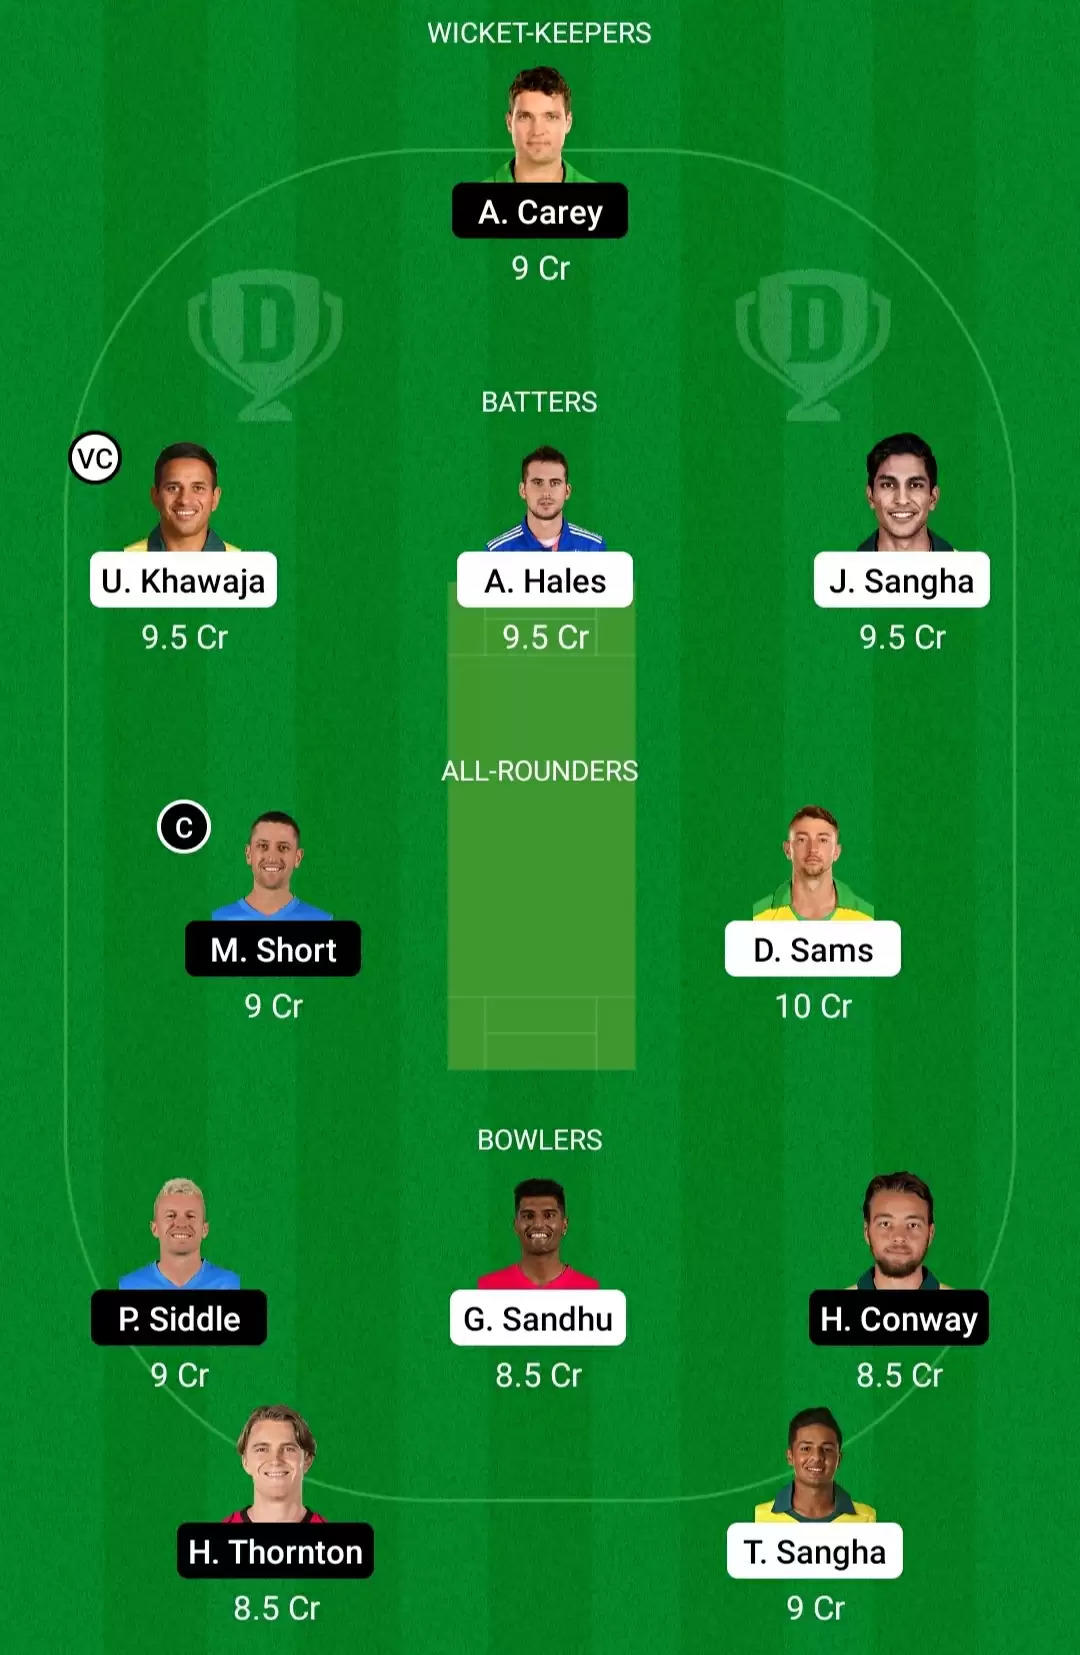 THU vs STR Dream11 Prediction, Knockout, BBL 2021-22: Playing XI, Fantasy Cricket Tips, Team, Weather Updates and Pitch Report